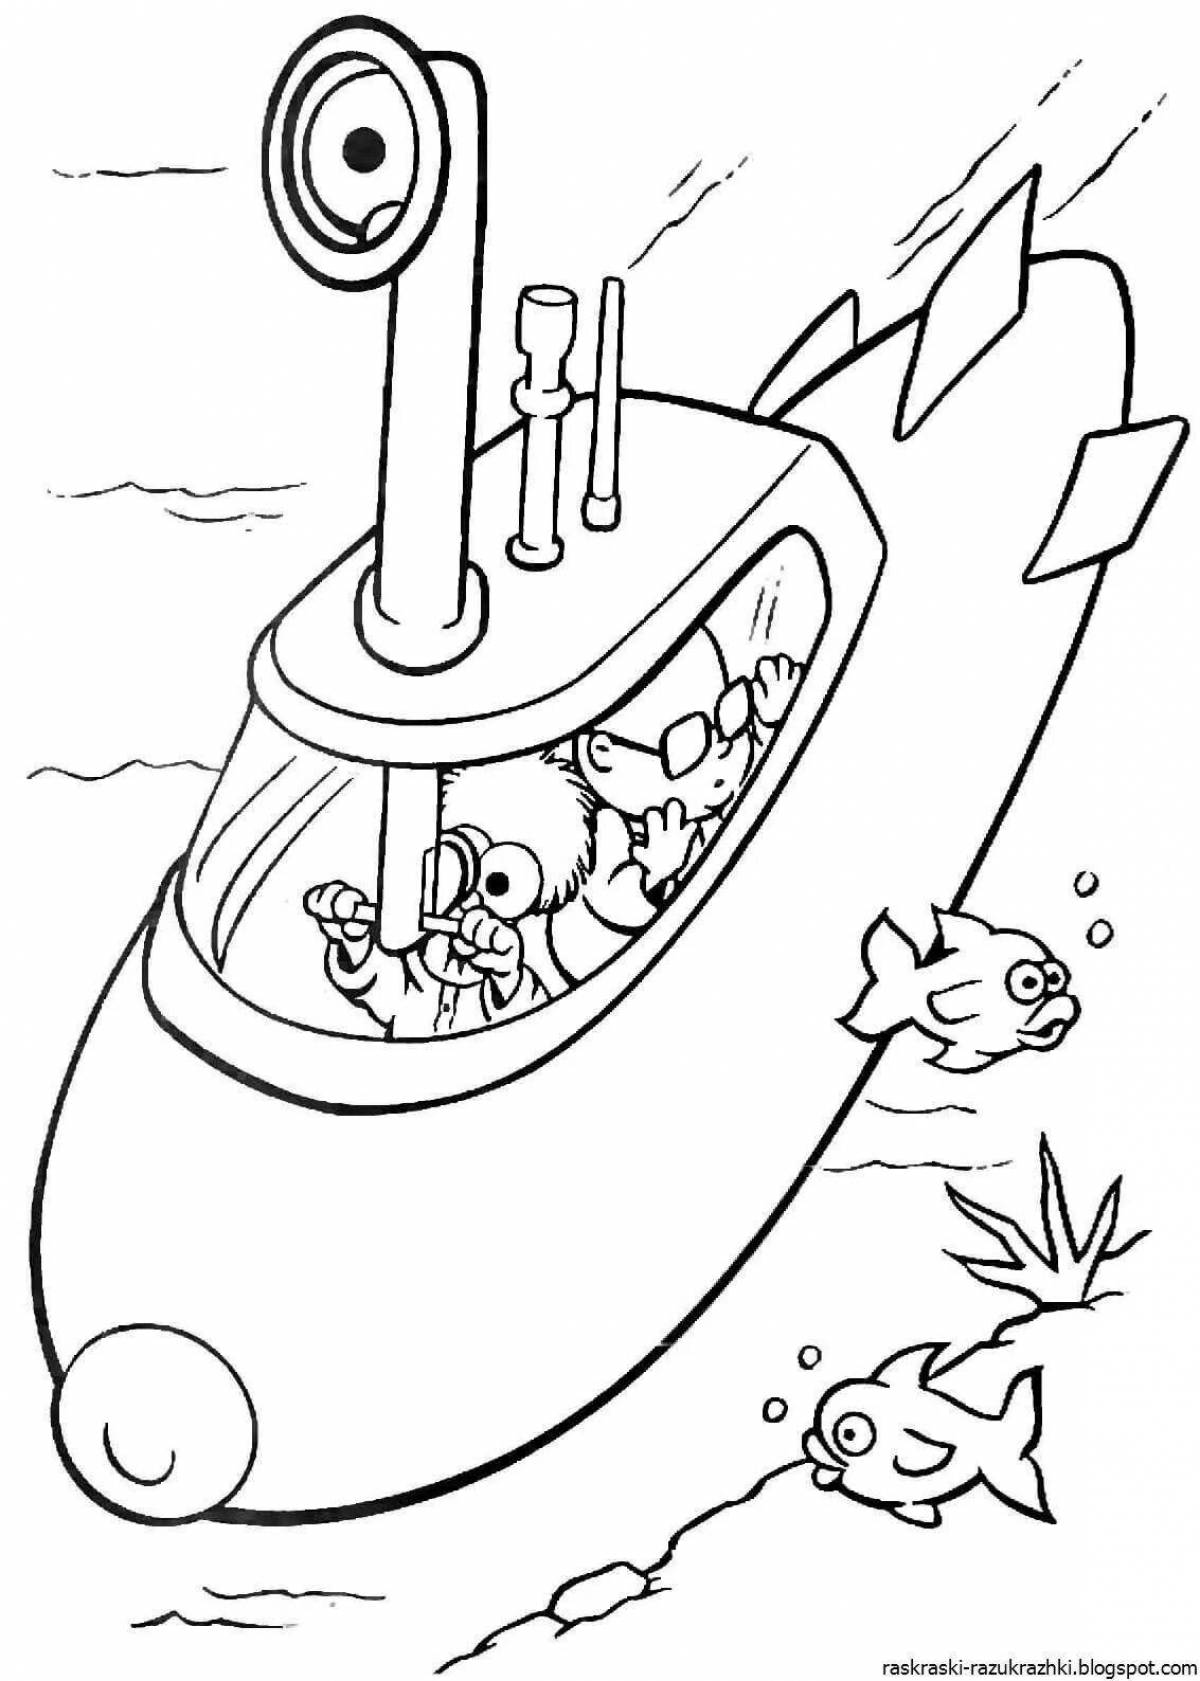 Amazing submarine coloring book for kids